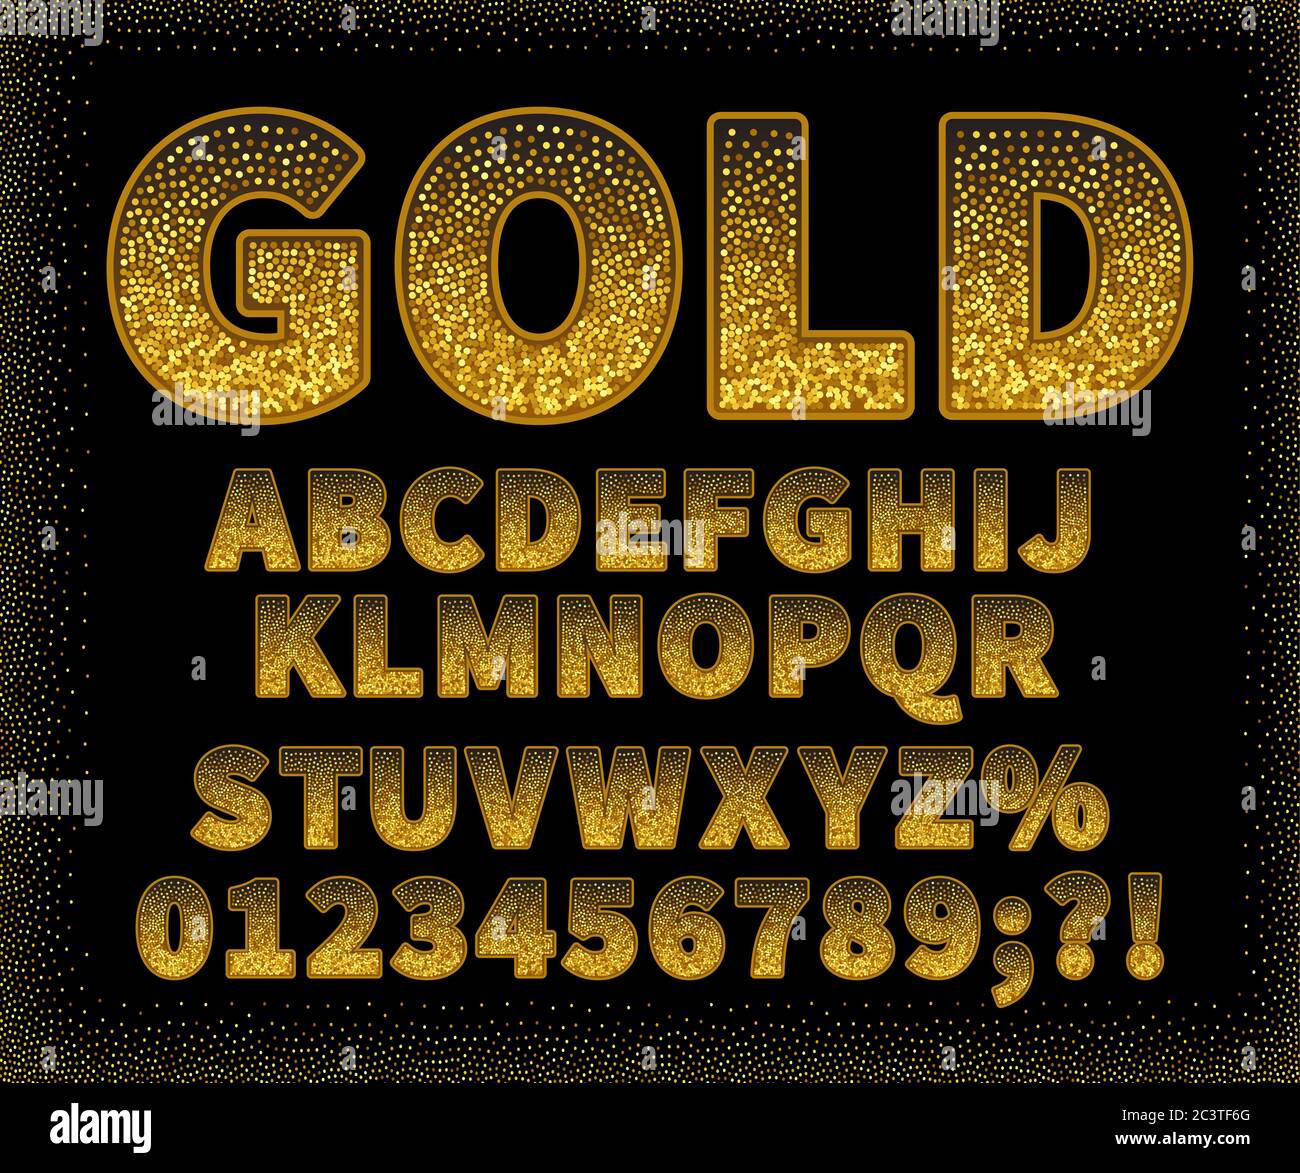 Vintage gold sans serif font on a black background. Capital letters with numbers. Stock Vector